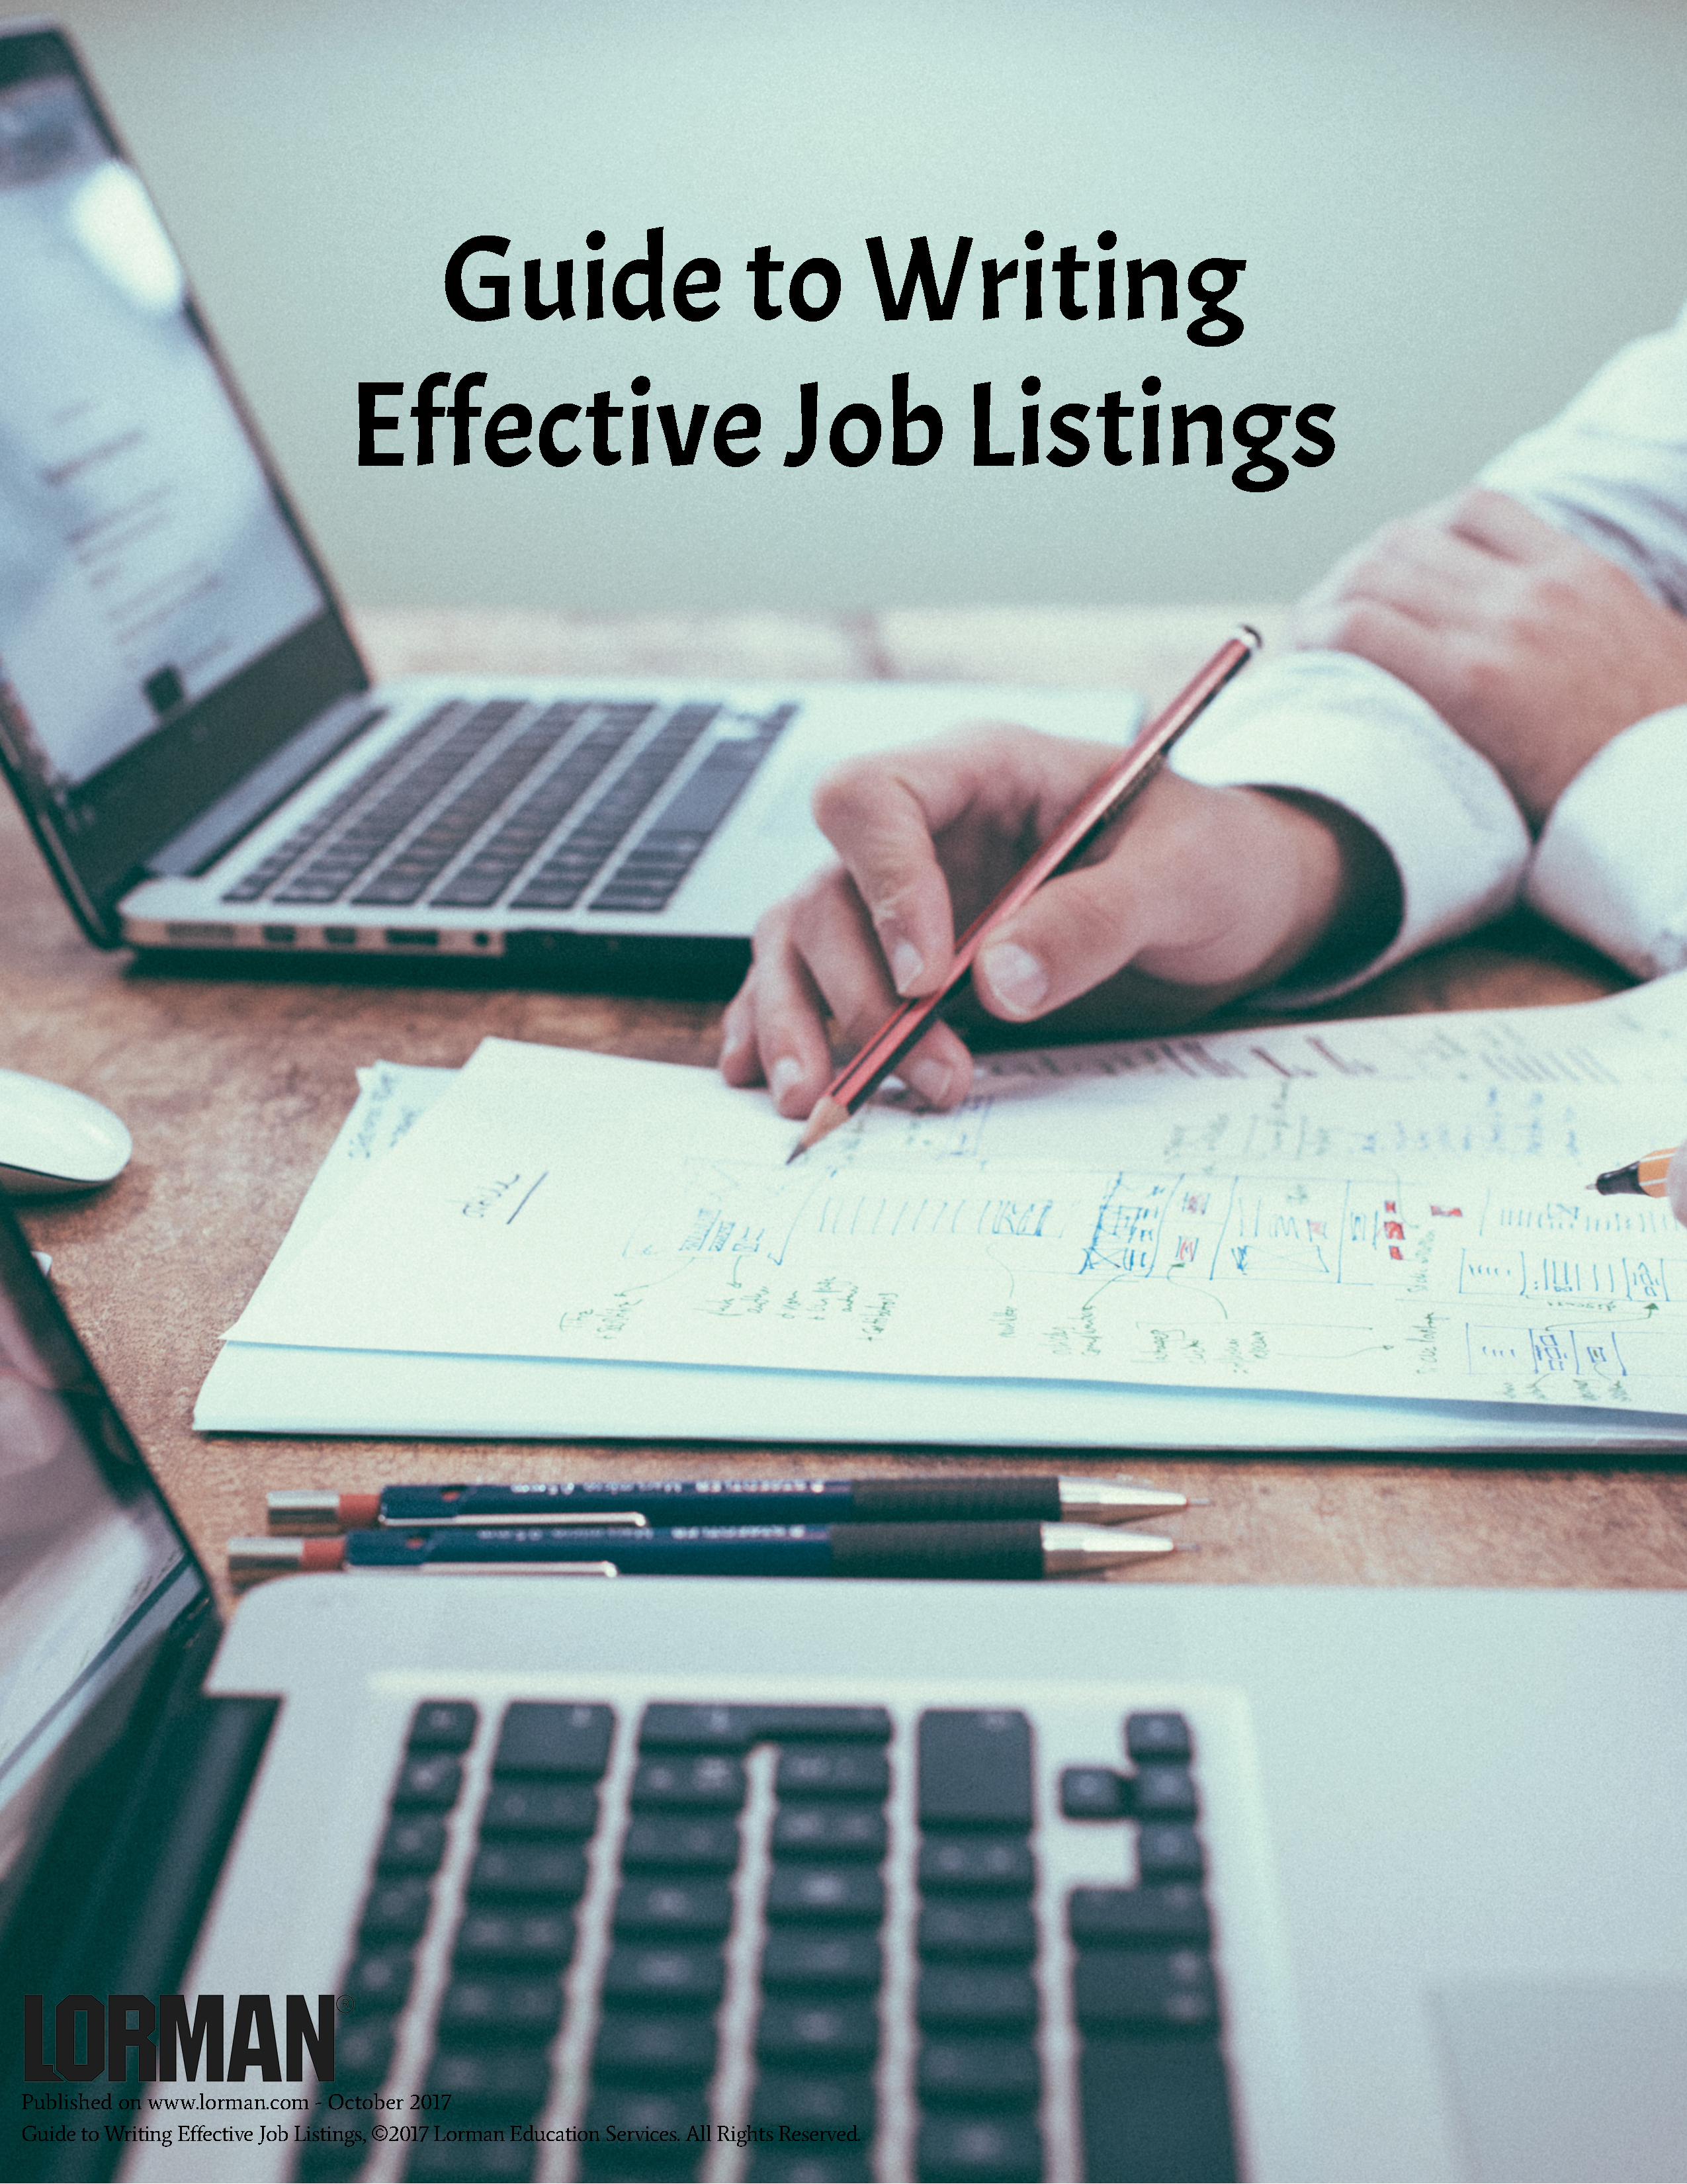 Guide to Writing Effective Job Listings